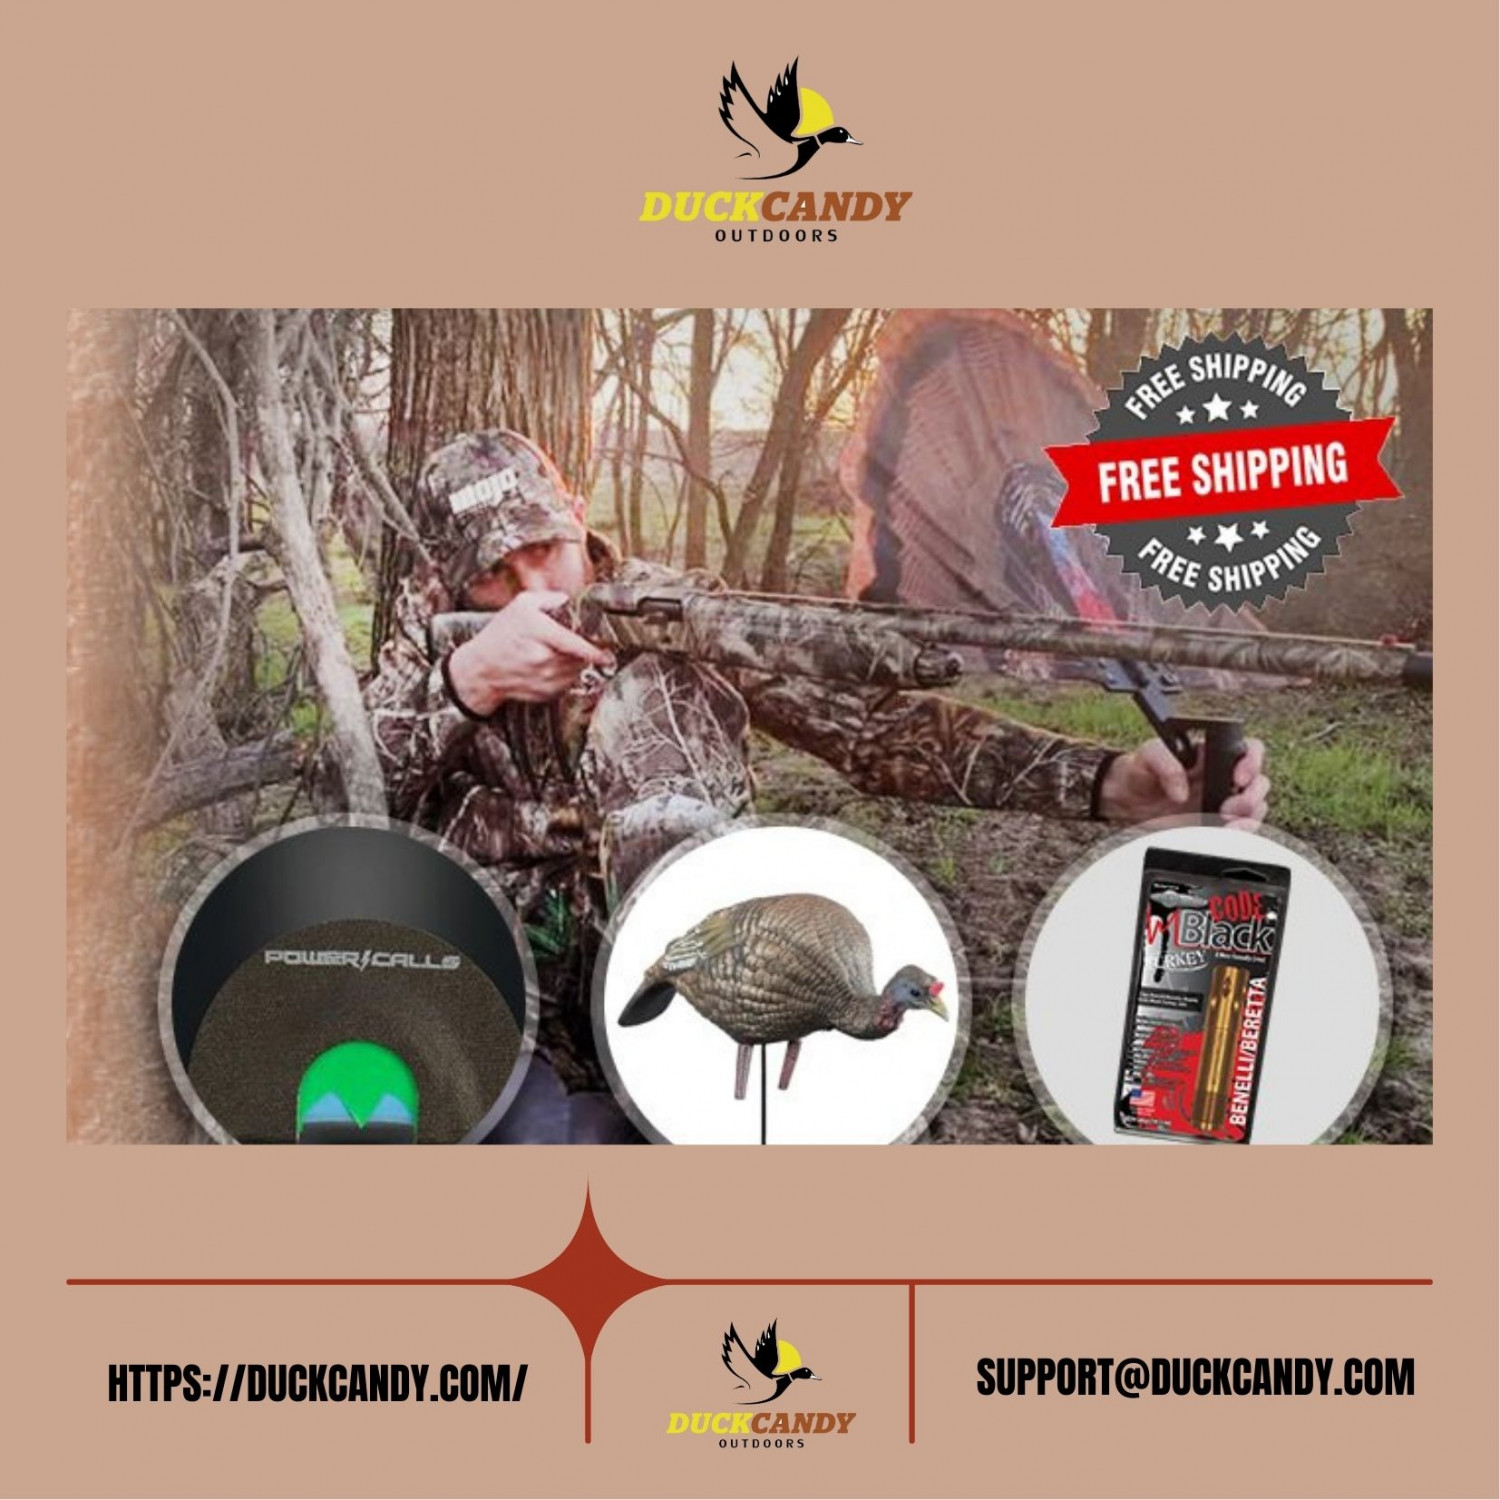 Duck Candy - Online Shopping Store of Hunting Products & Accessories Infographic